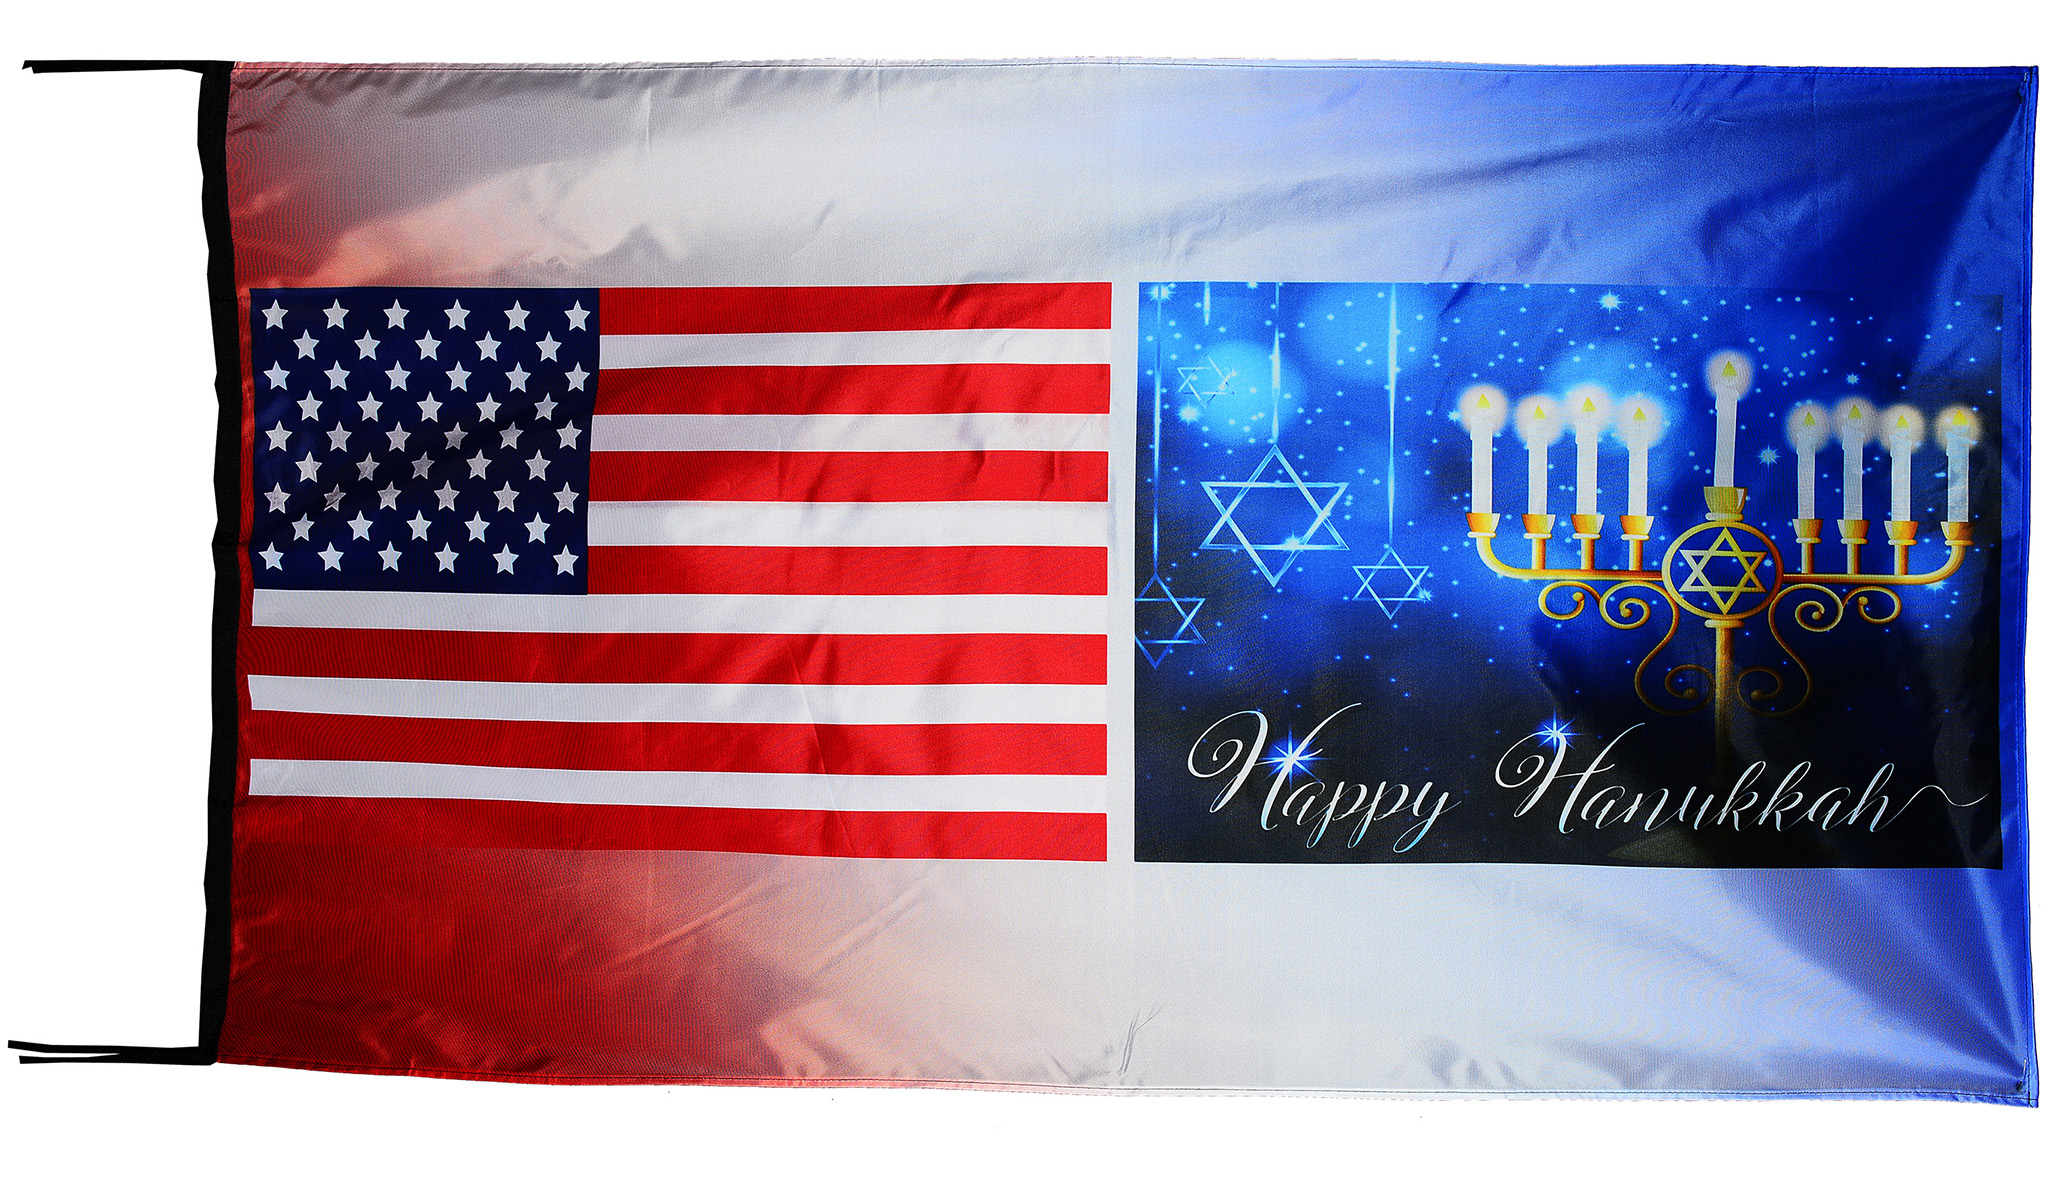 Flag  067 USA / US Country / United States Of America and Happy Hannukah / Jewish / Jew / Hollidays / Patriotic / Pride Hybrid Weather-Resistant Polyester Outdoor Flag Landscape Banner / Vivid Colors / 3 X 5 FT (150 x 90cm) International Flags for Sale